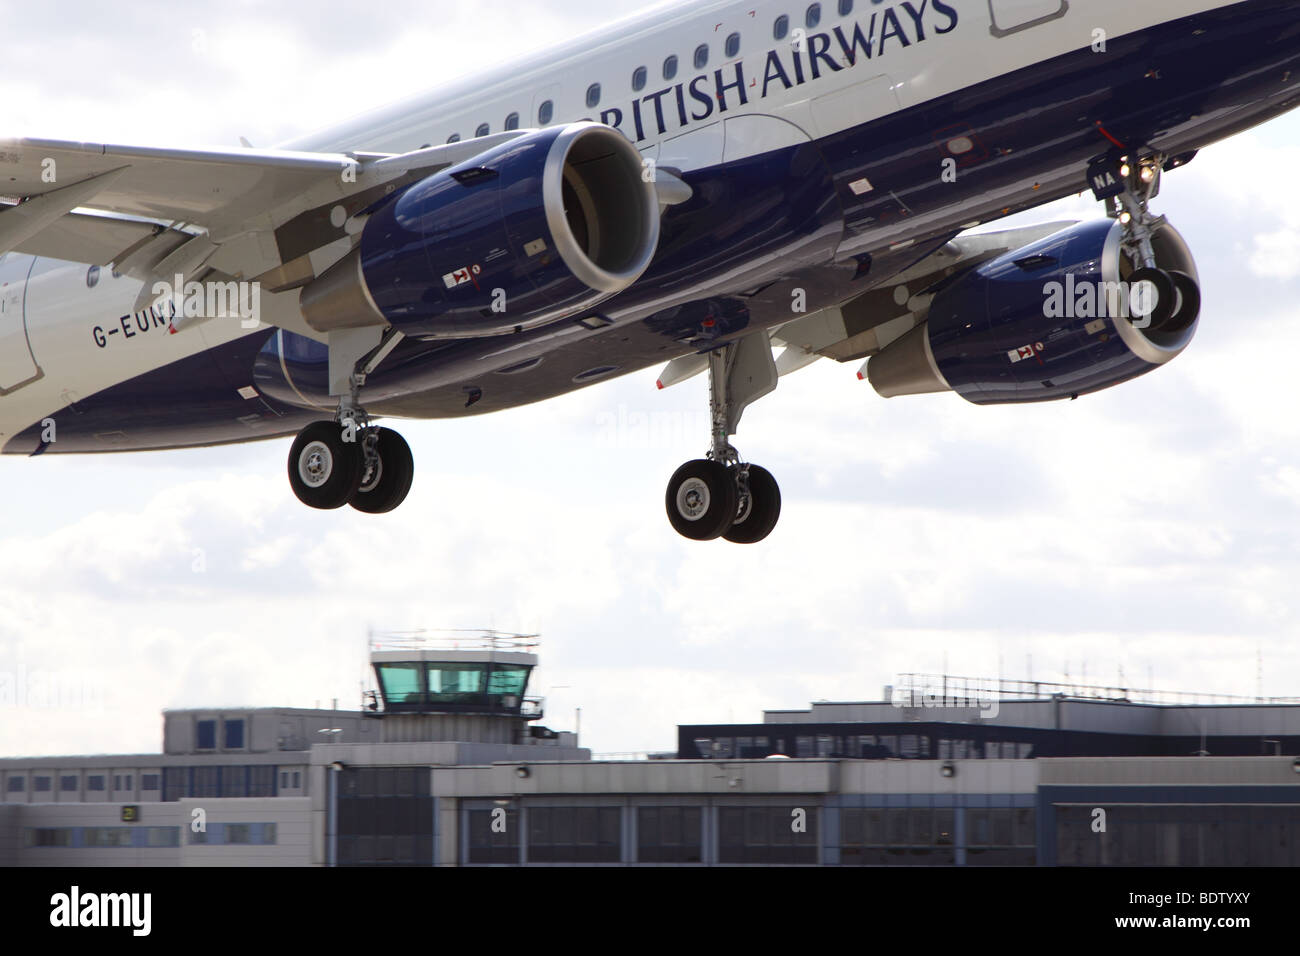 British Airways Airbus A318 Takeoff London City Airport With Control Tower in background Stock Photo